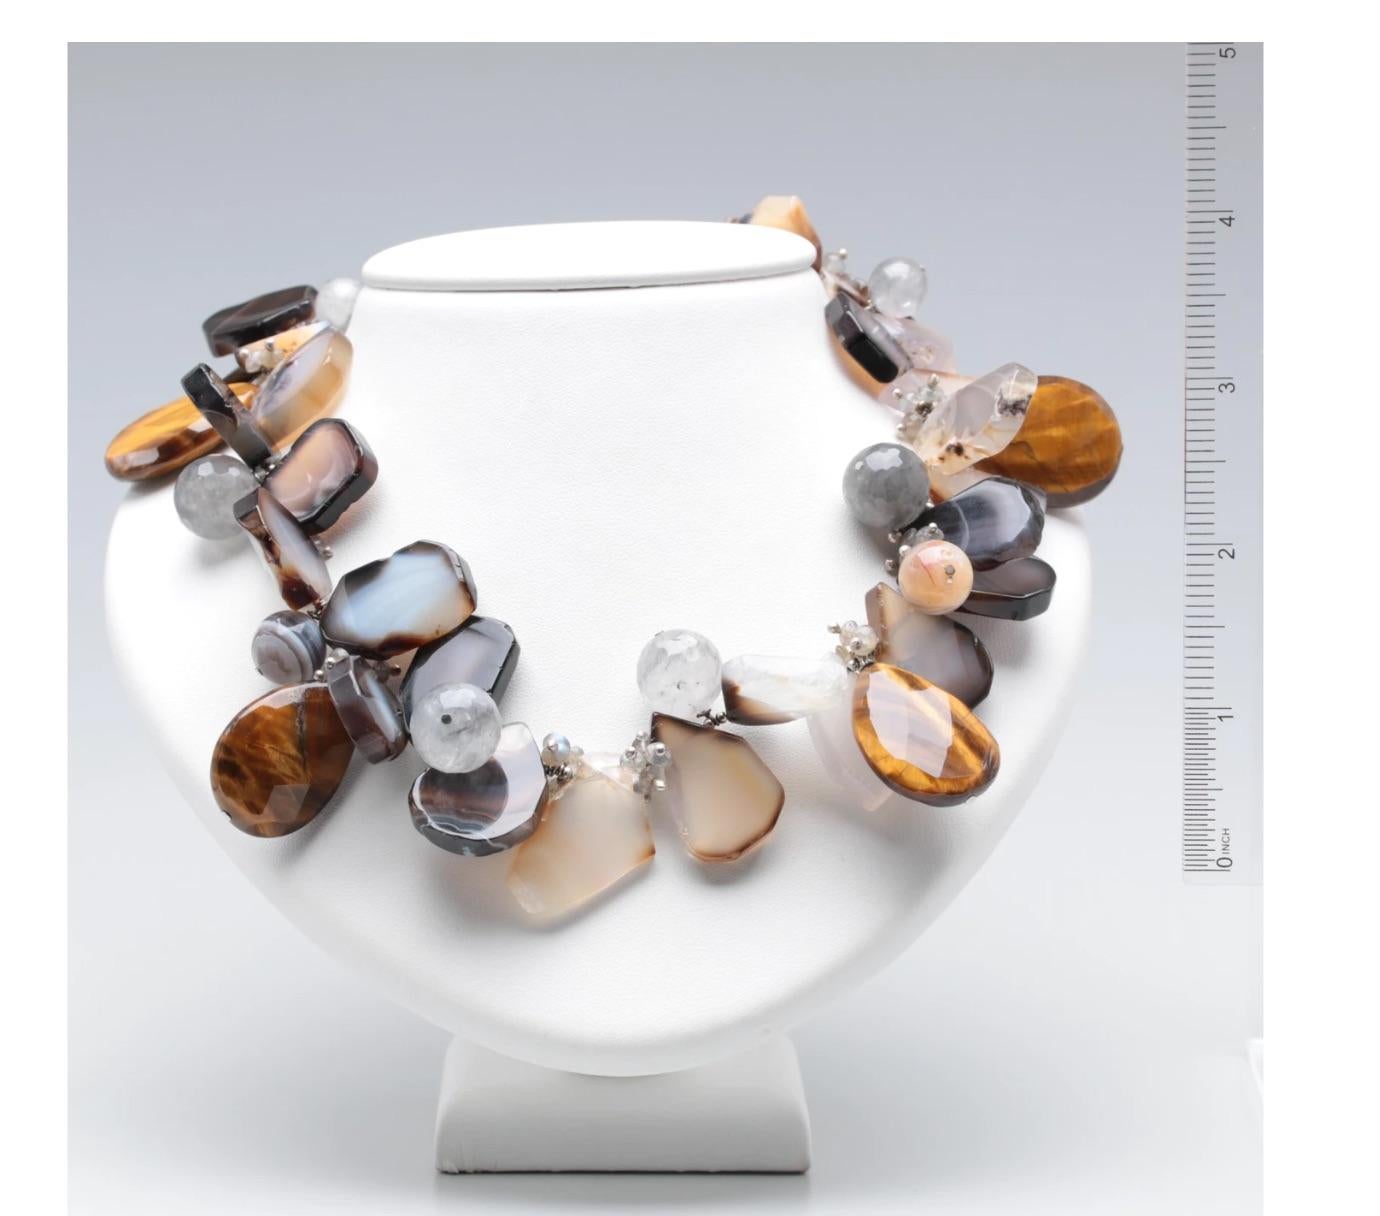 Modern Statement Necklace-Gorgeous Bountiful Semi Precious Stones of Various Hand Selected Shapes and Sizes of Agate and Tiger's Eye and Sterling to Surround your Neck with Style and Sophistication. by Designer Artisan- Amy Kahn Russell
Label AKR